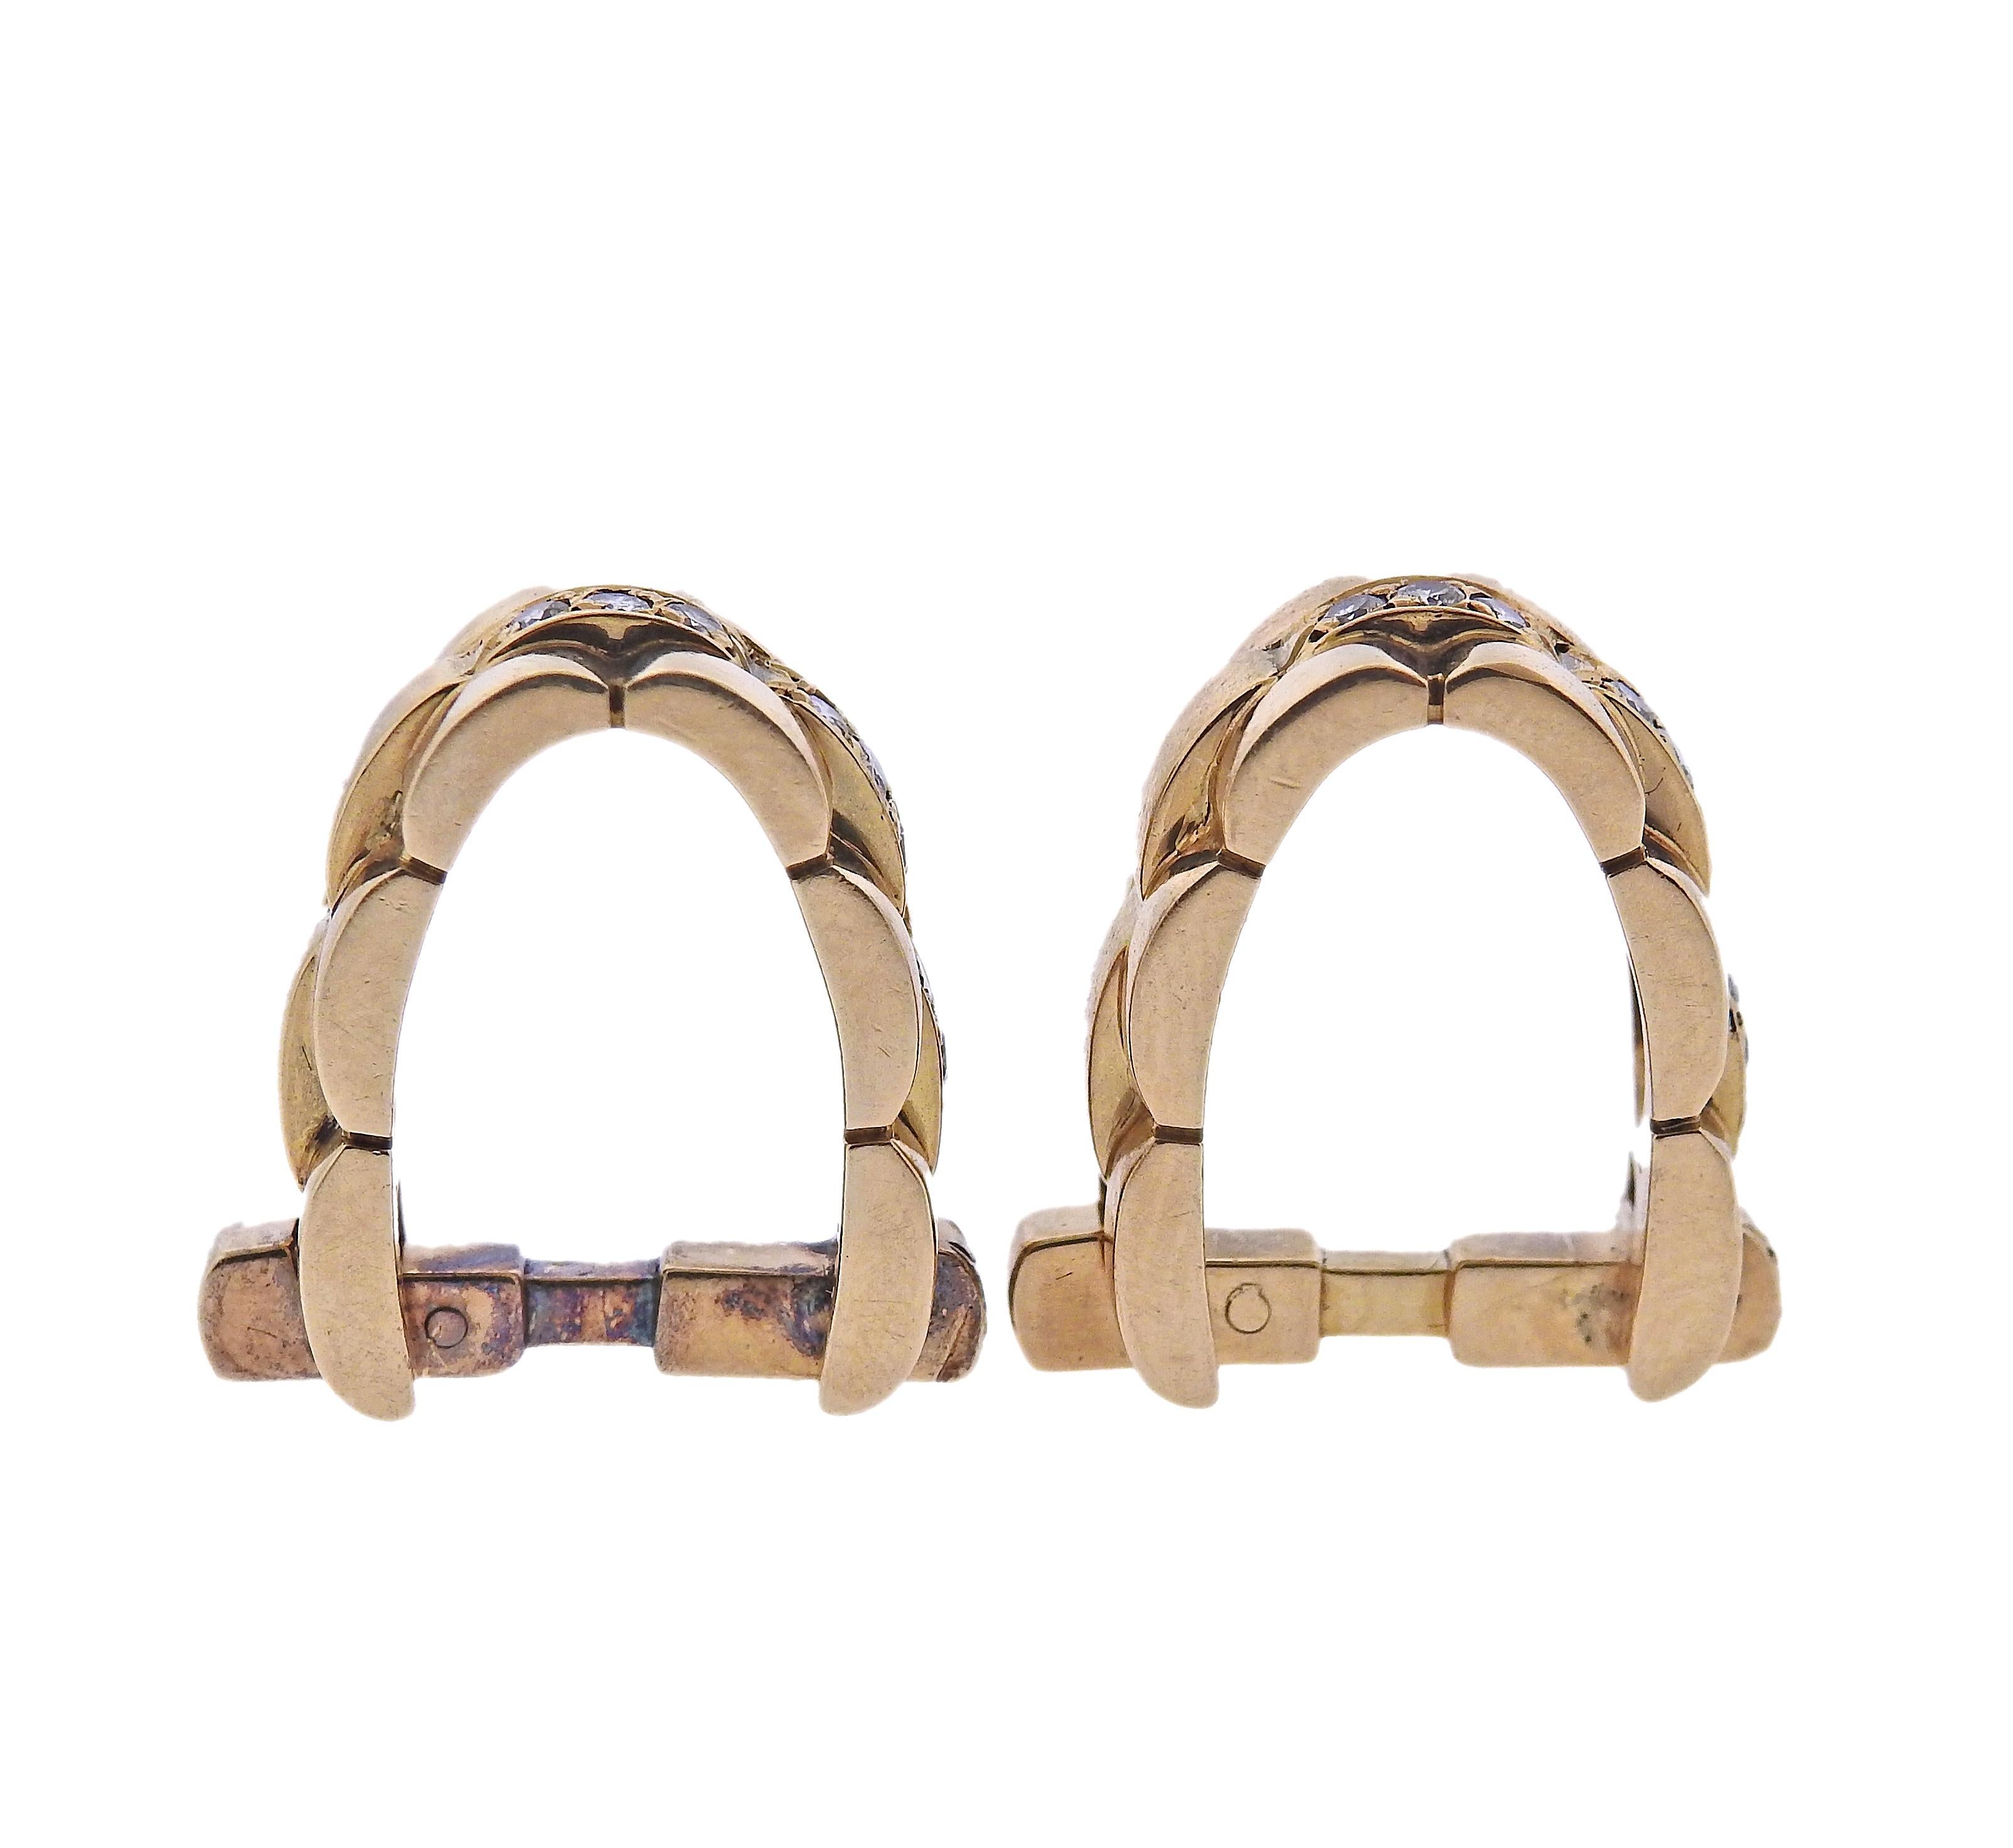 Pair of 18k gold stirrup cufflinks by Cartier, designed in signature Maillon Panthere link design, adorned with approx. 0.30ctw in G/VS diamonds. Each cufflink measures 20mm x 8mm. Marked: 761930, Cartier, 750. Weight - 14.4 grams.